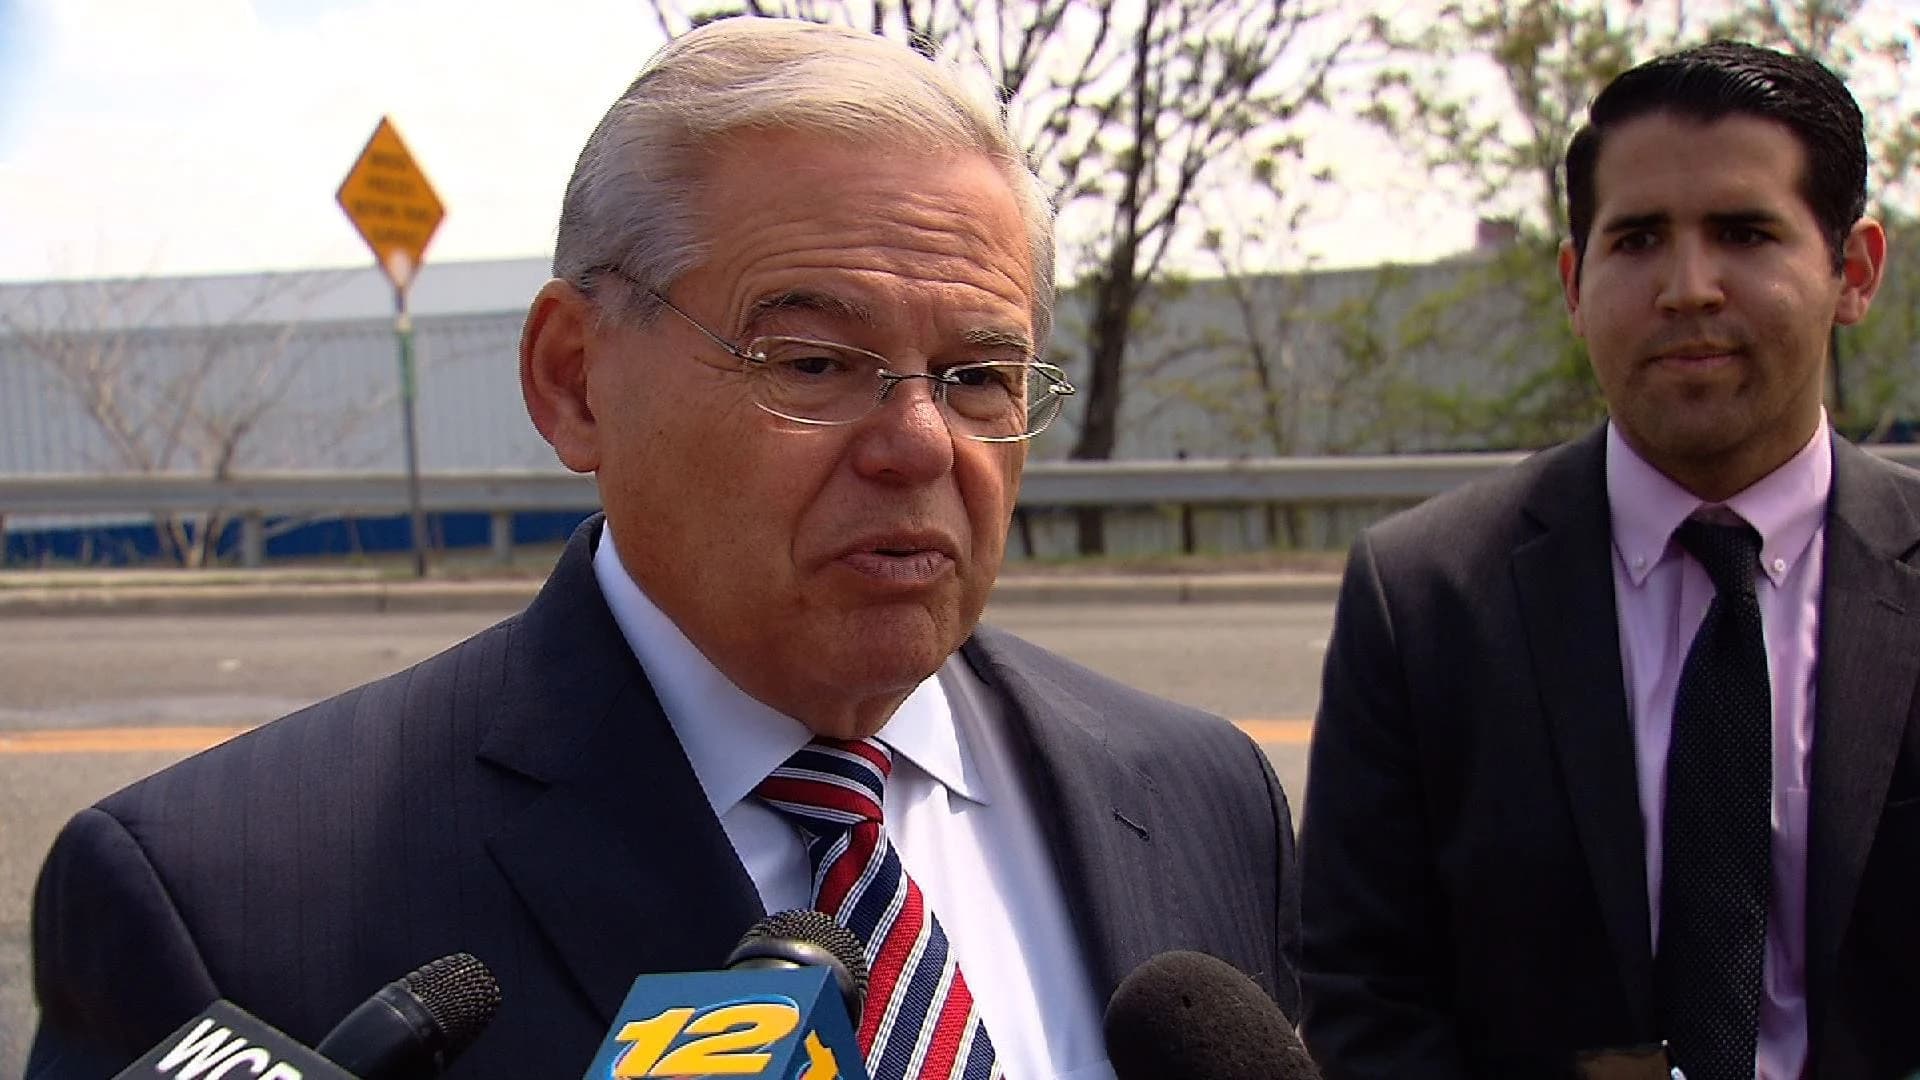 Ethics panel closes probe into gifts from Menendez donor